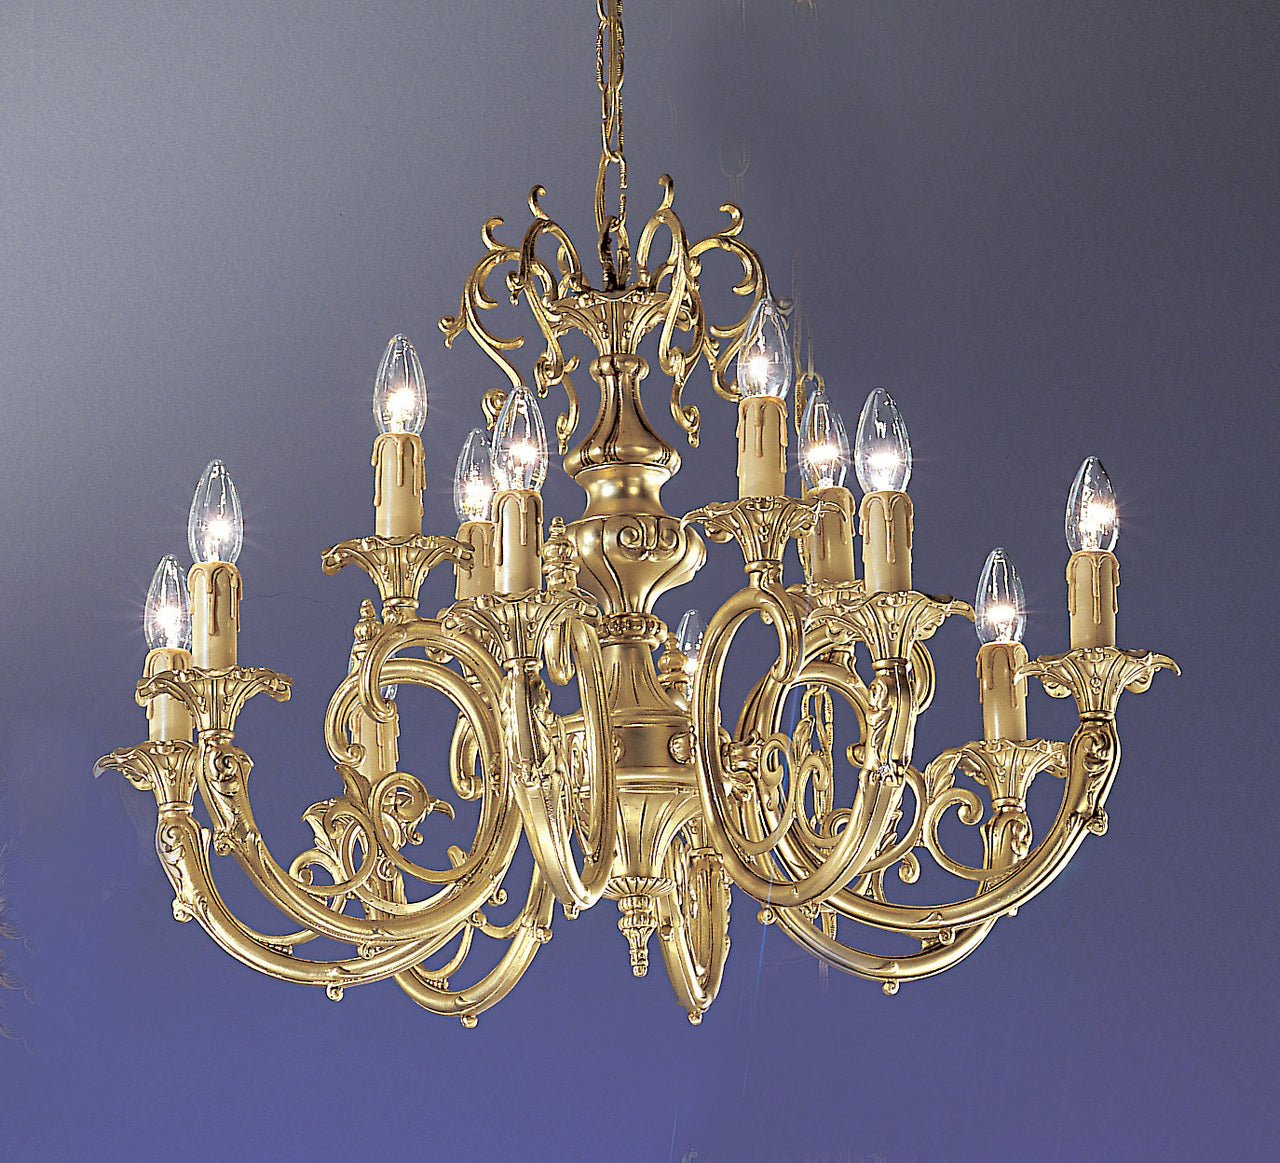 Classic Lighting 5712 SBB Princeton Cast Brass Chandelier in Satin Bronze/Brown Patina (Imported from Spain)